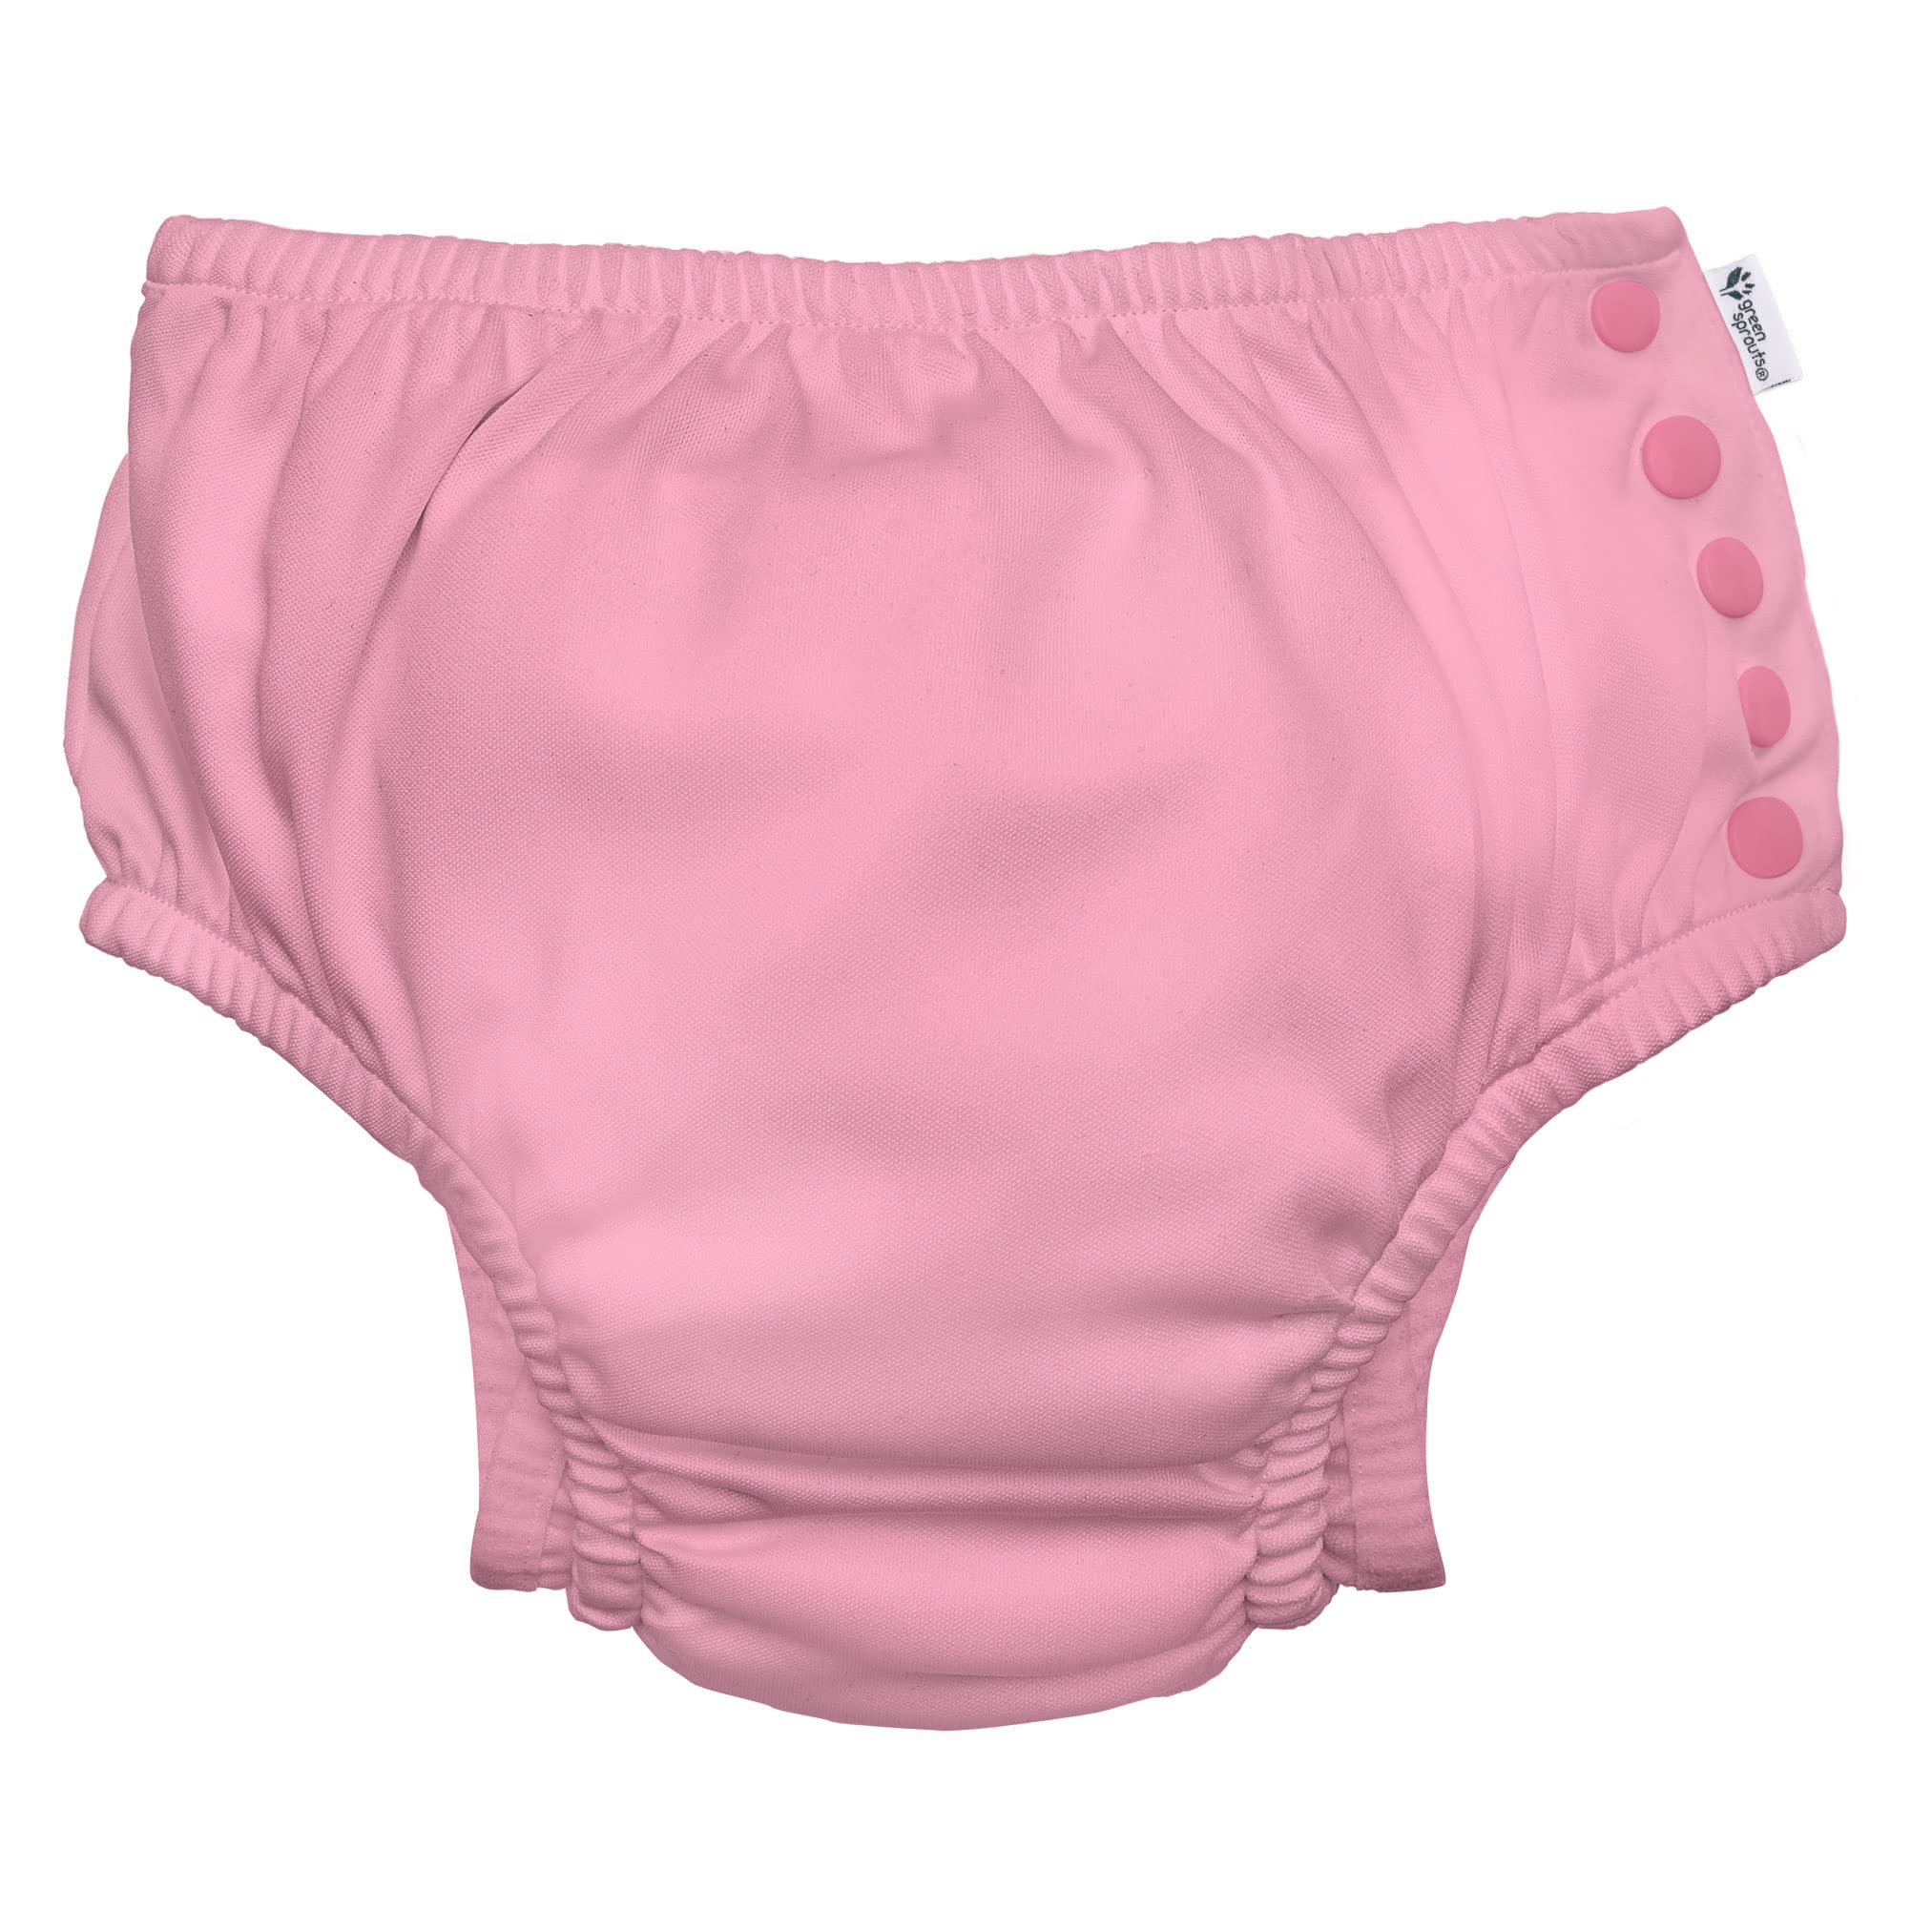 i play. by green sprouts Reusable, Eco Snap Swim Diaper with Gussets, UPF 50, Light Pink, Patented Design, STANDARD 100 by OEKO-TEX Certified 3T